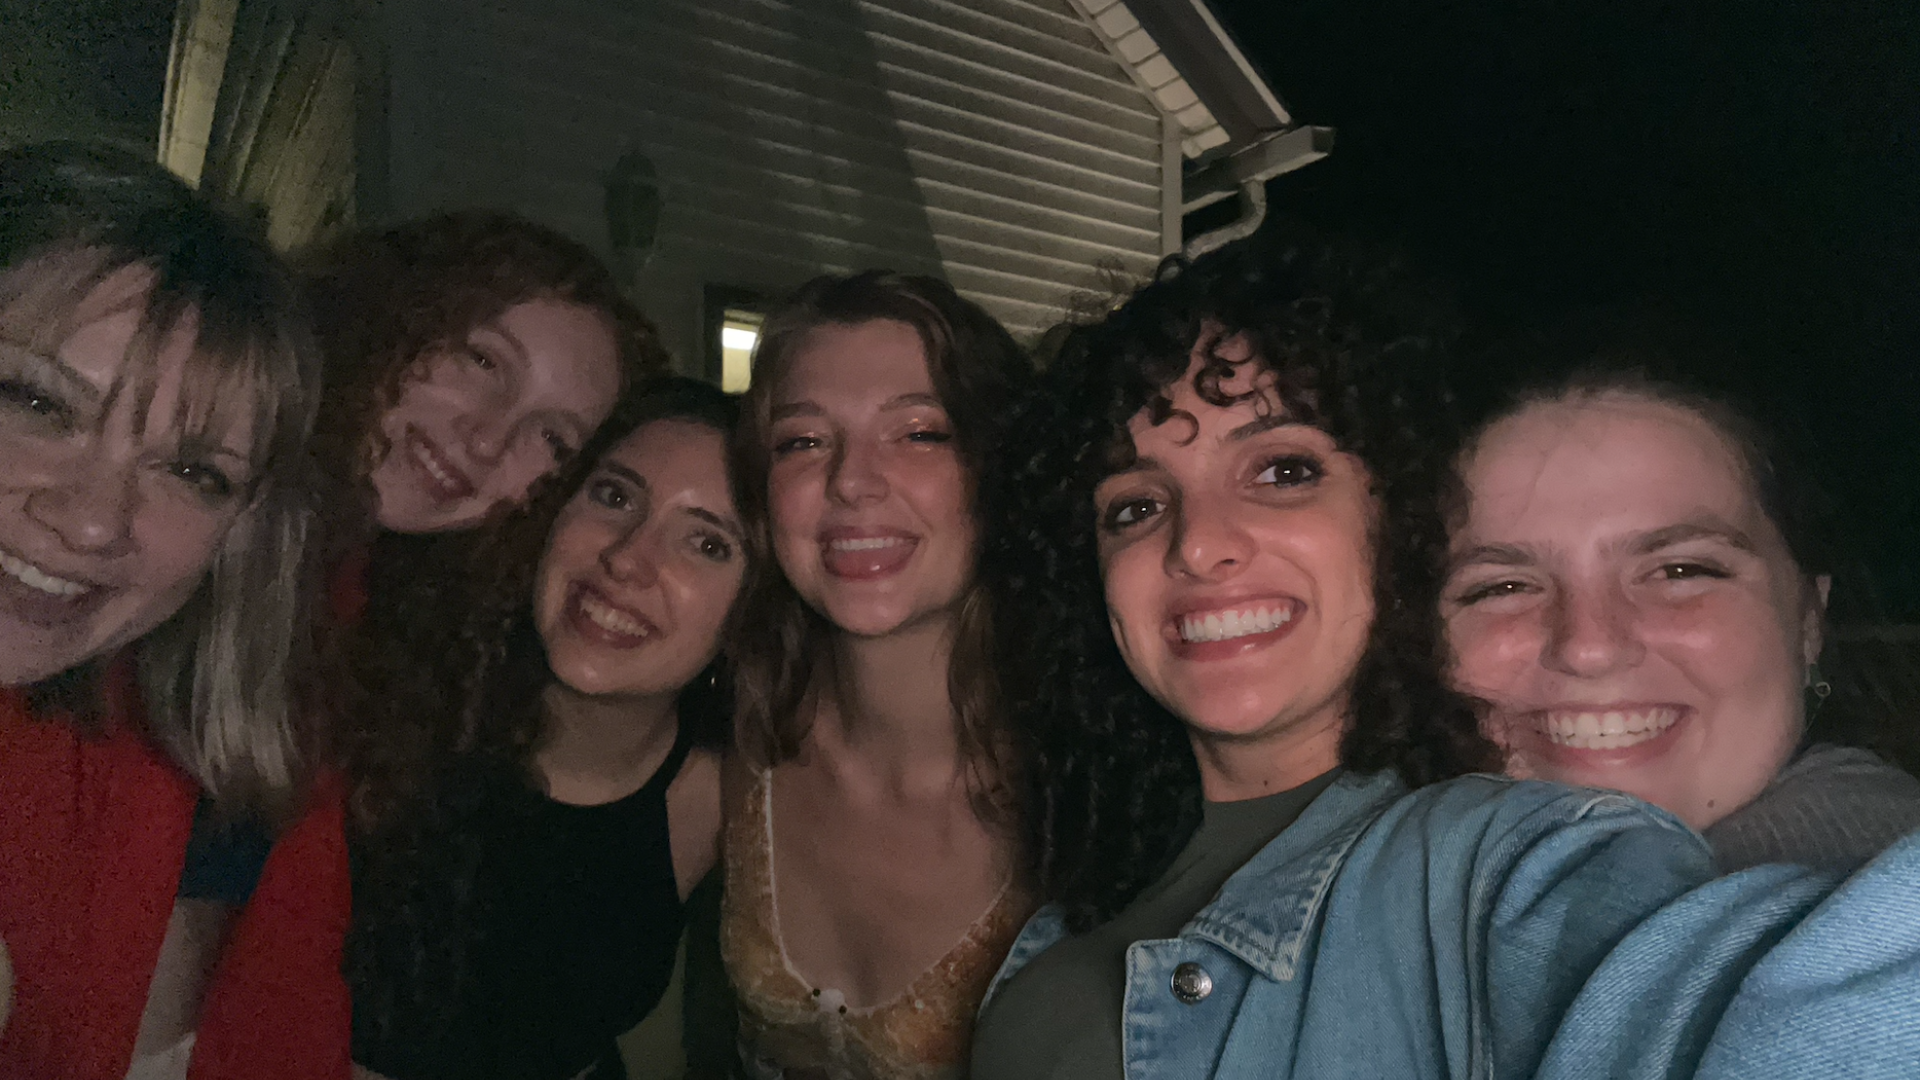 My five friends and I take a wide selfie shot of us together at nighttime. We're outside of an off-campus house!